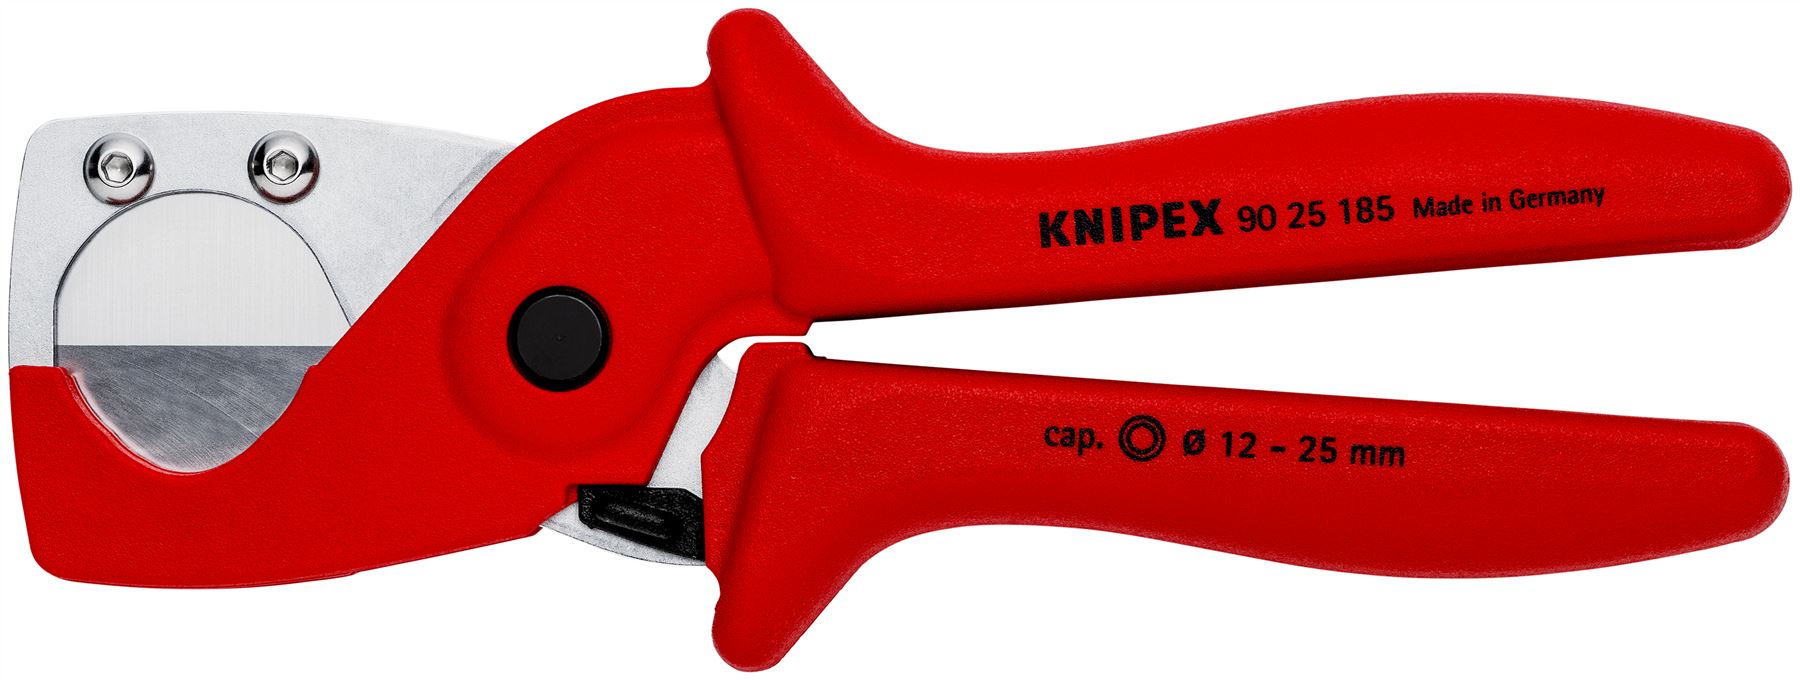 KNIPEX Pipe Cutters for Plastic Composite Pipes 185mm 12-25mm Diameter 90 25 185